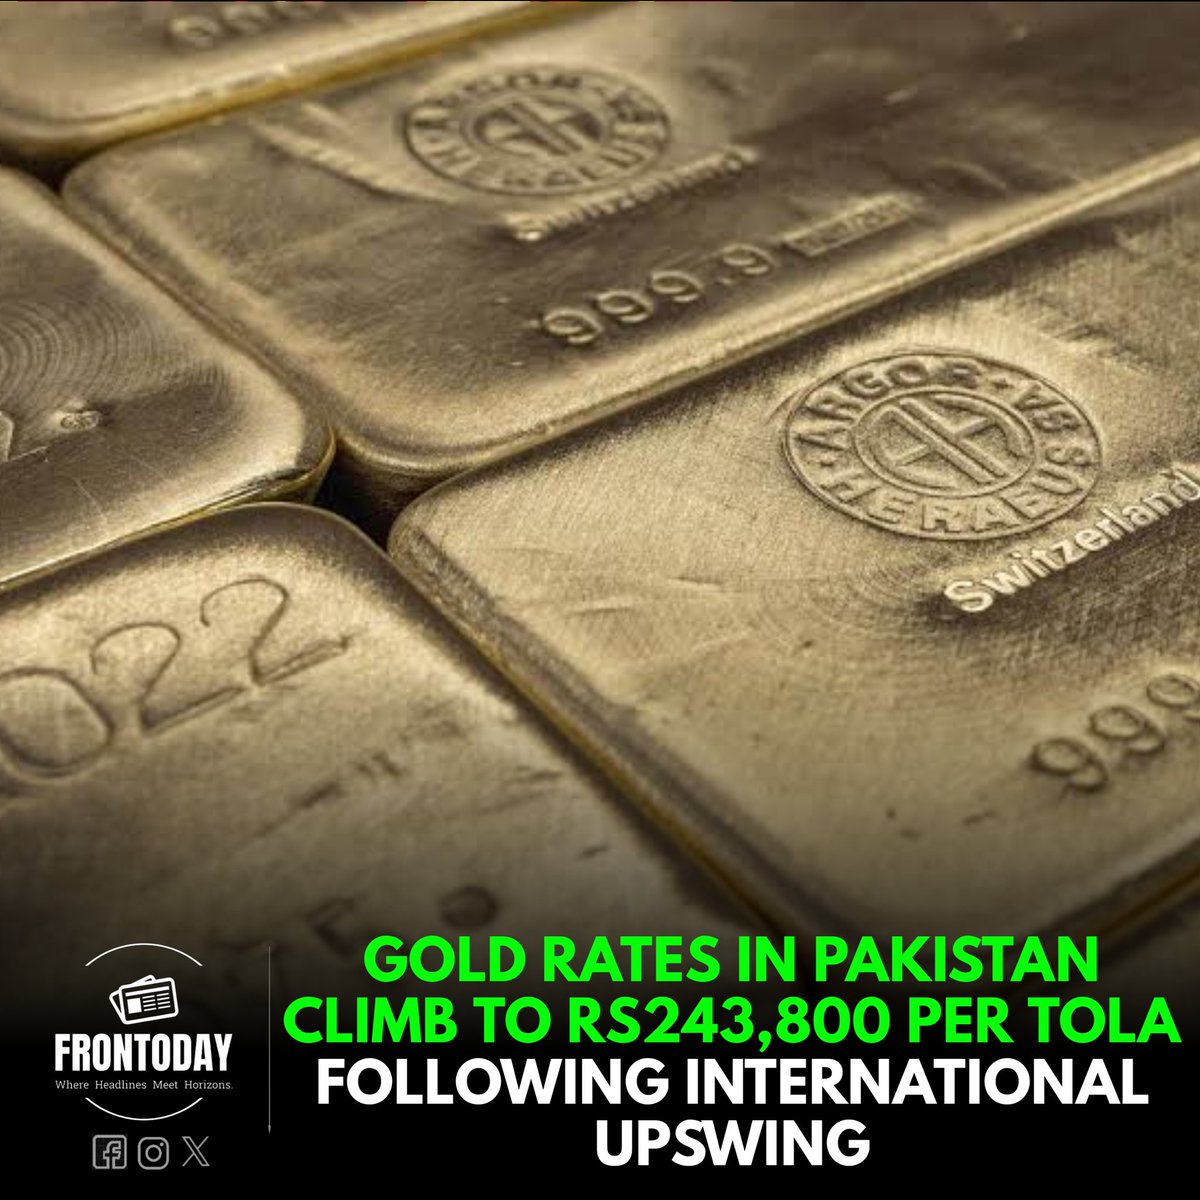 Gold prices in Pakistan rebound, hitting Rs243,800 per tola after international rates increase. Silver rates also rise to Rs2,650 per tola. #GoldPrices #PakistanMarket